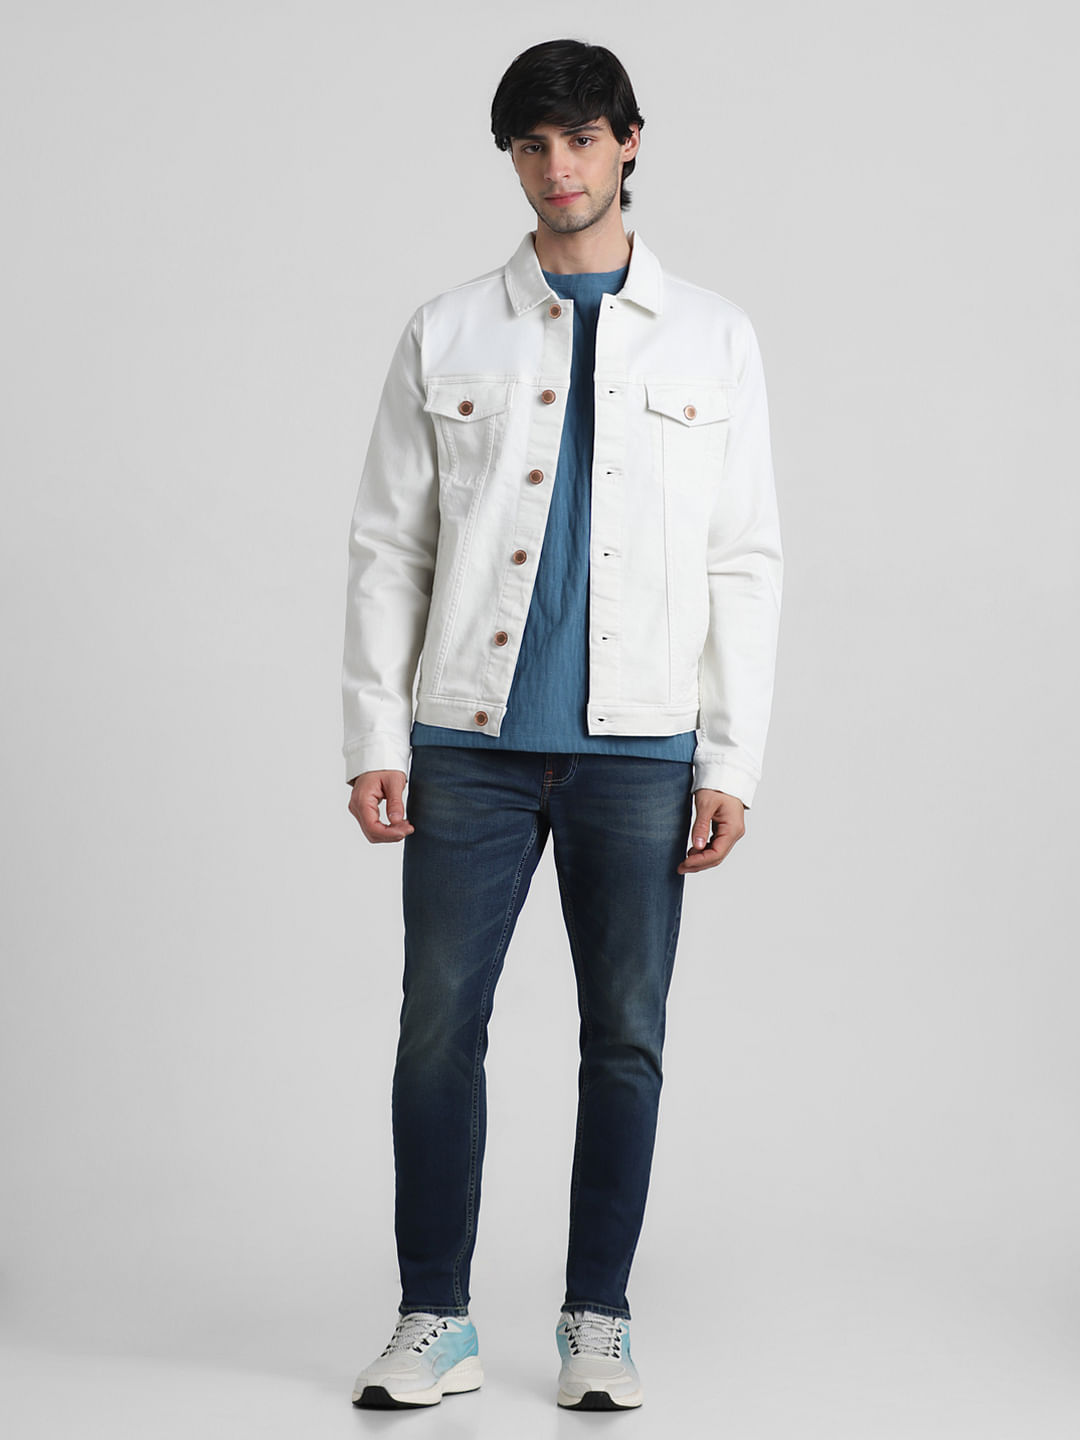 Do white jeans and a dark blue denim jacket go together? If yes, which top  would best go with them? - Quora